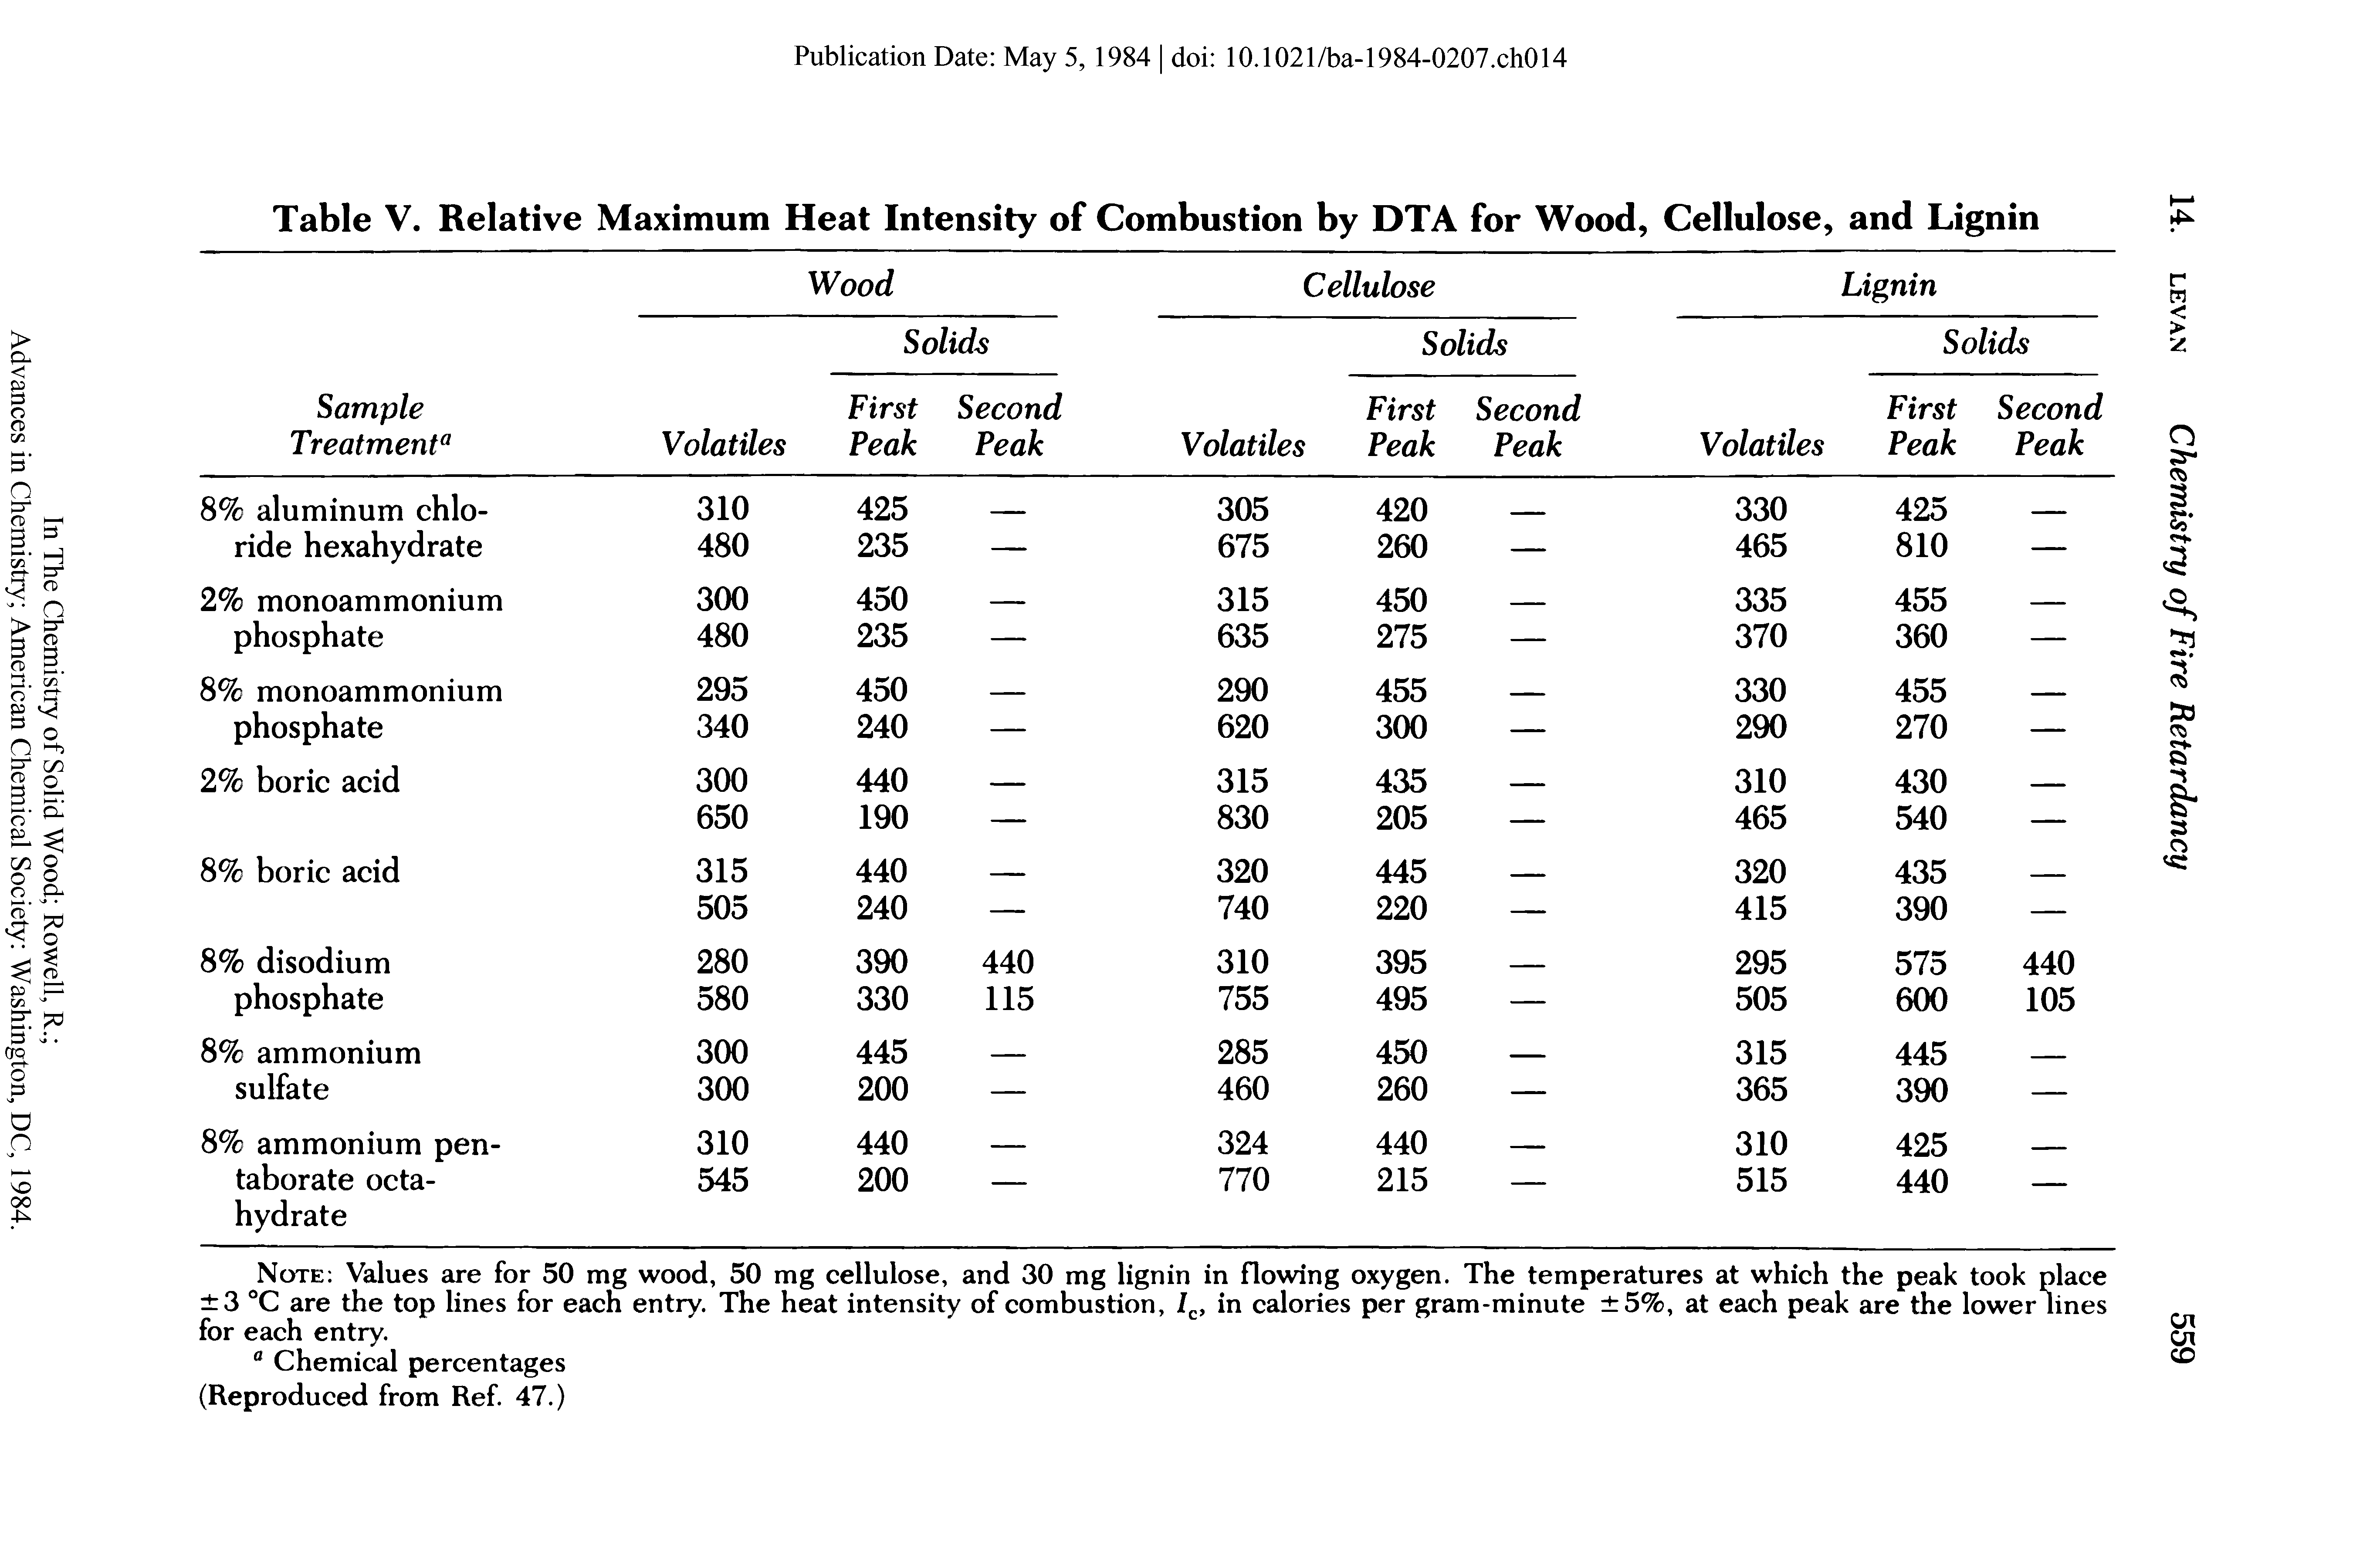 Table V. Relative Maximum Heat Intensity of Combustion by DTA for Wood, Cellulose, and Lignin...